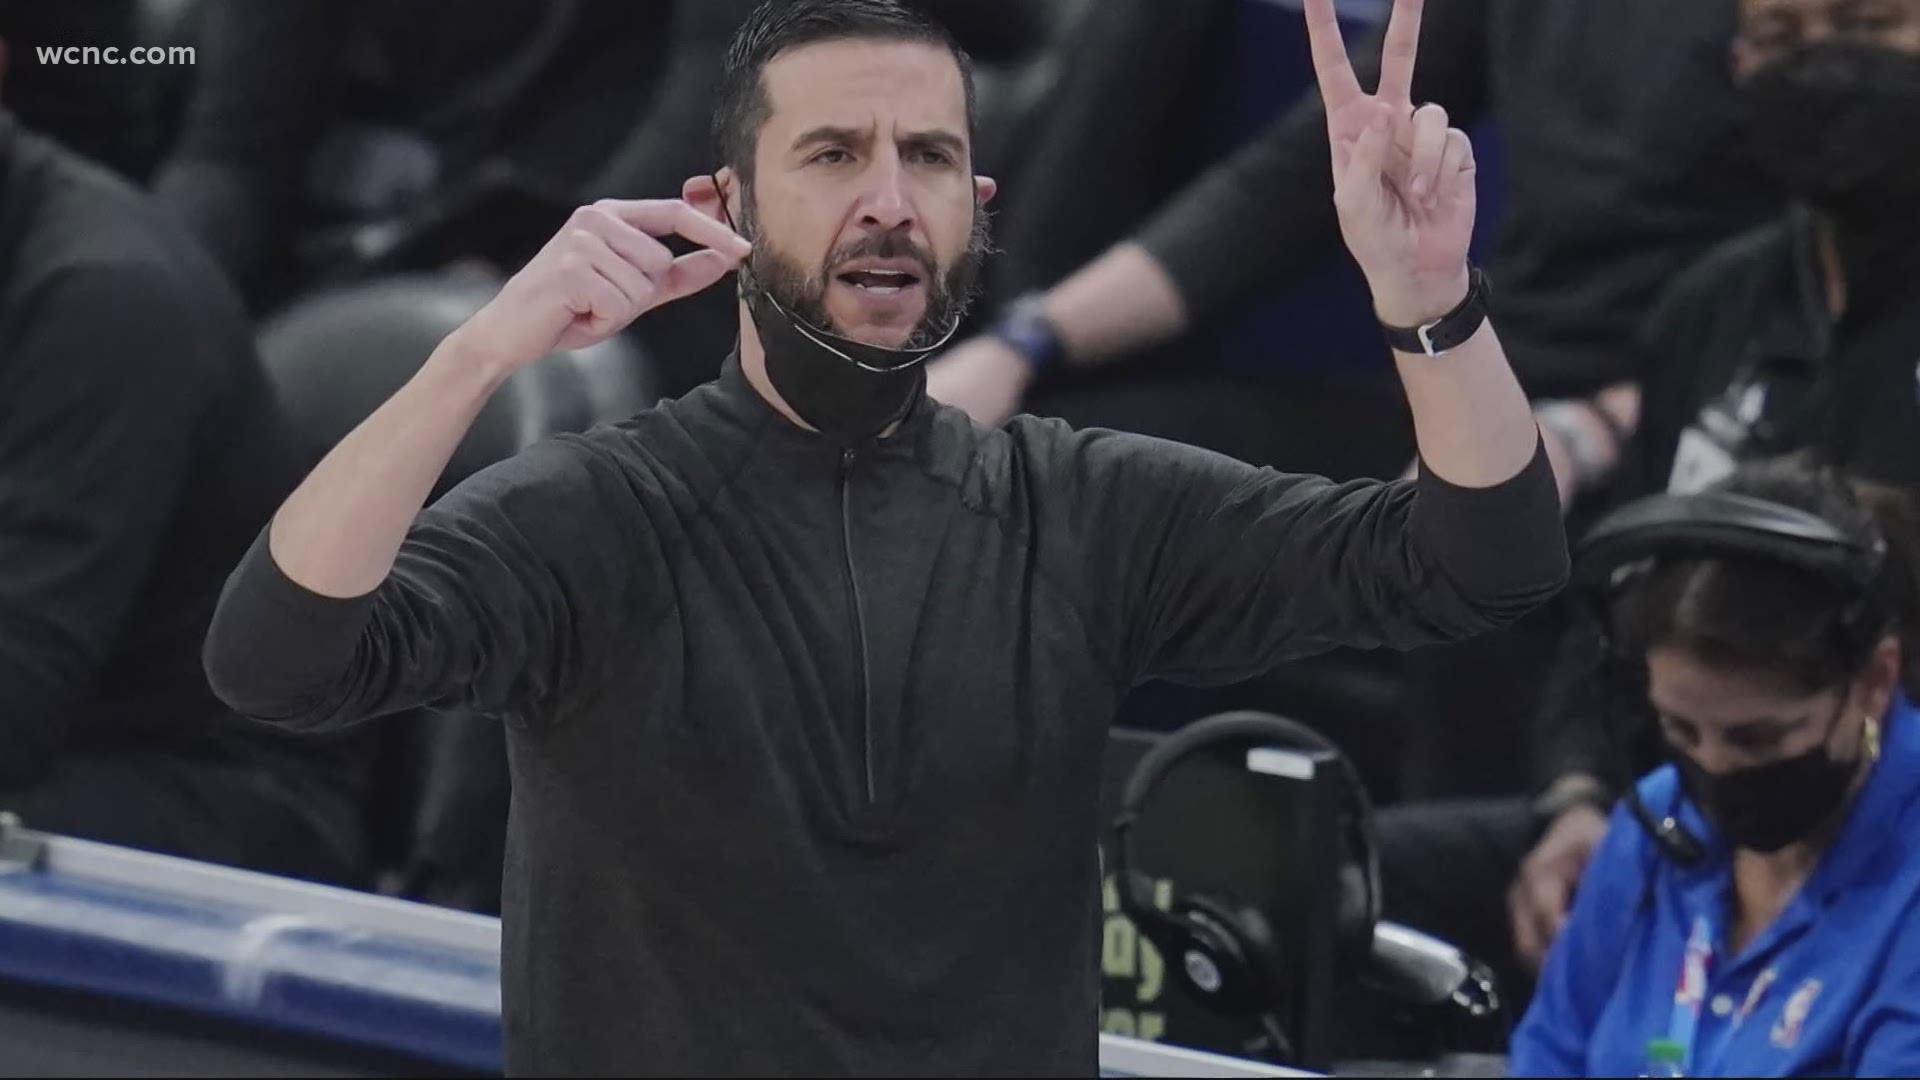 After Sunday's victory over the Portland Trail Blazers, the Charlotte Hornets surrounded coach James Borrego in the locker room and doused him with water.